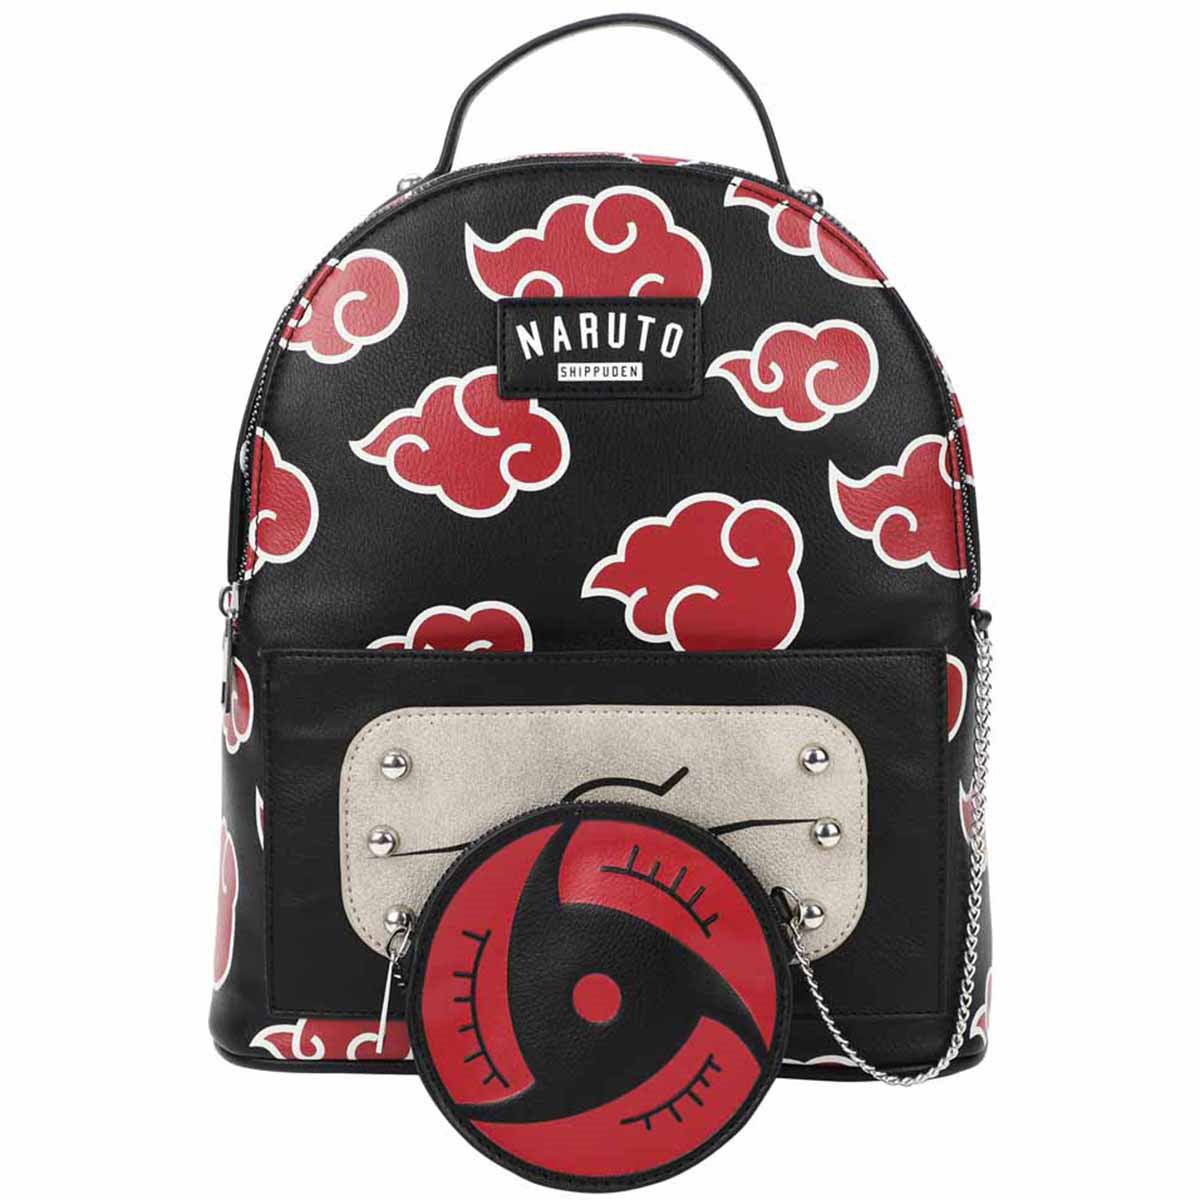 Naruto Backpack - Shippuden for wholesale sourcing !